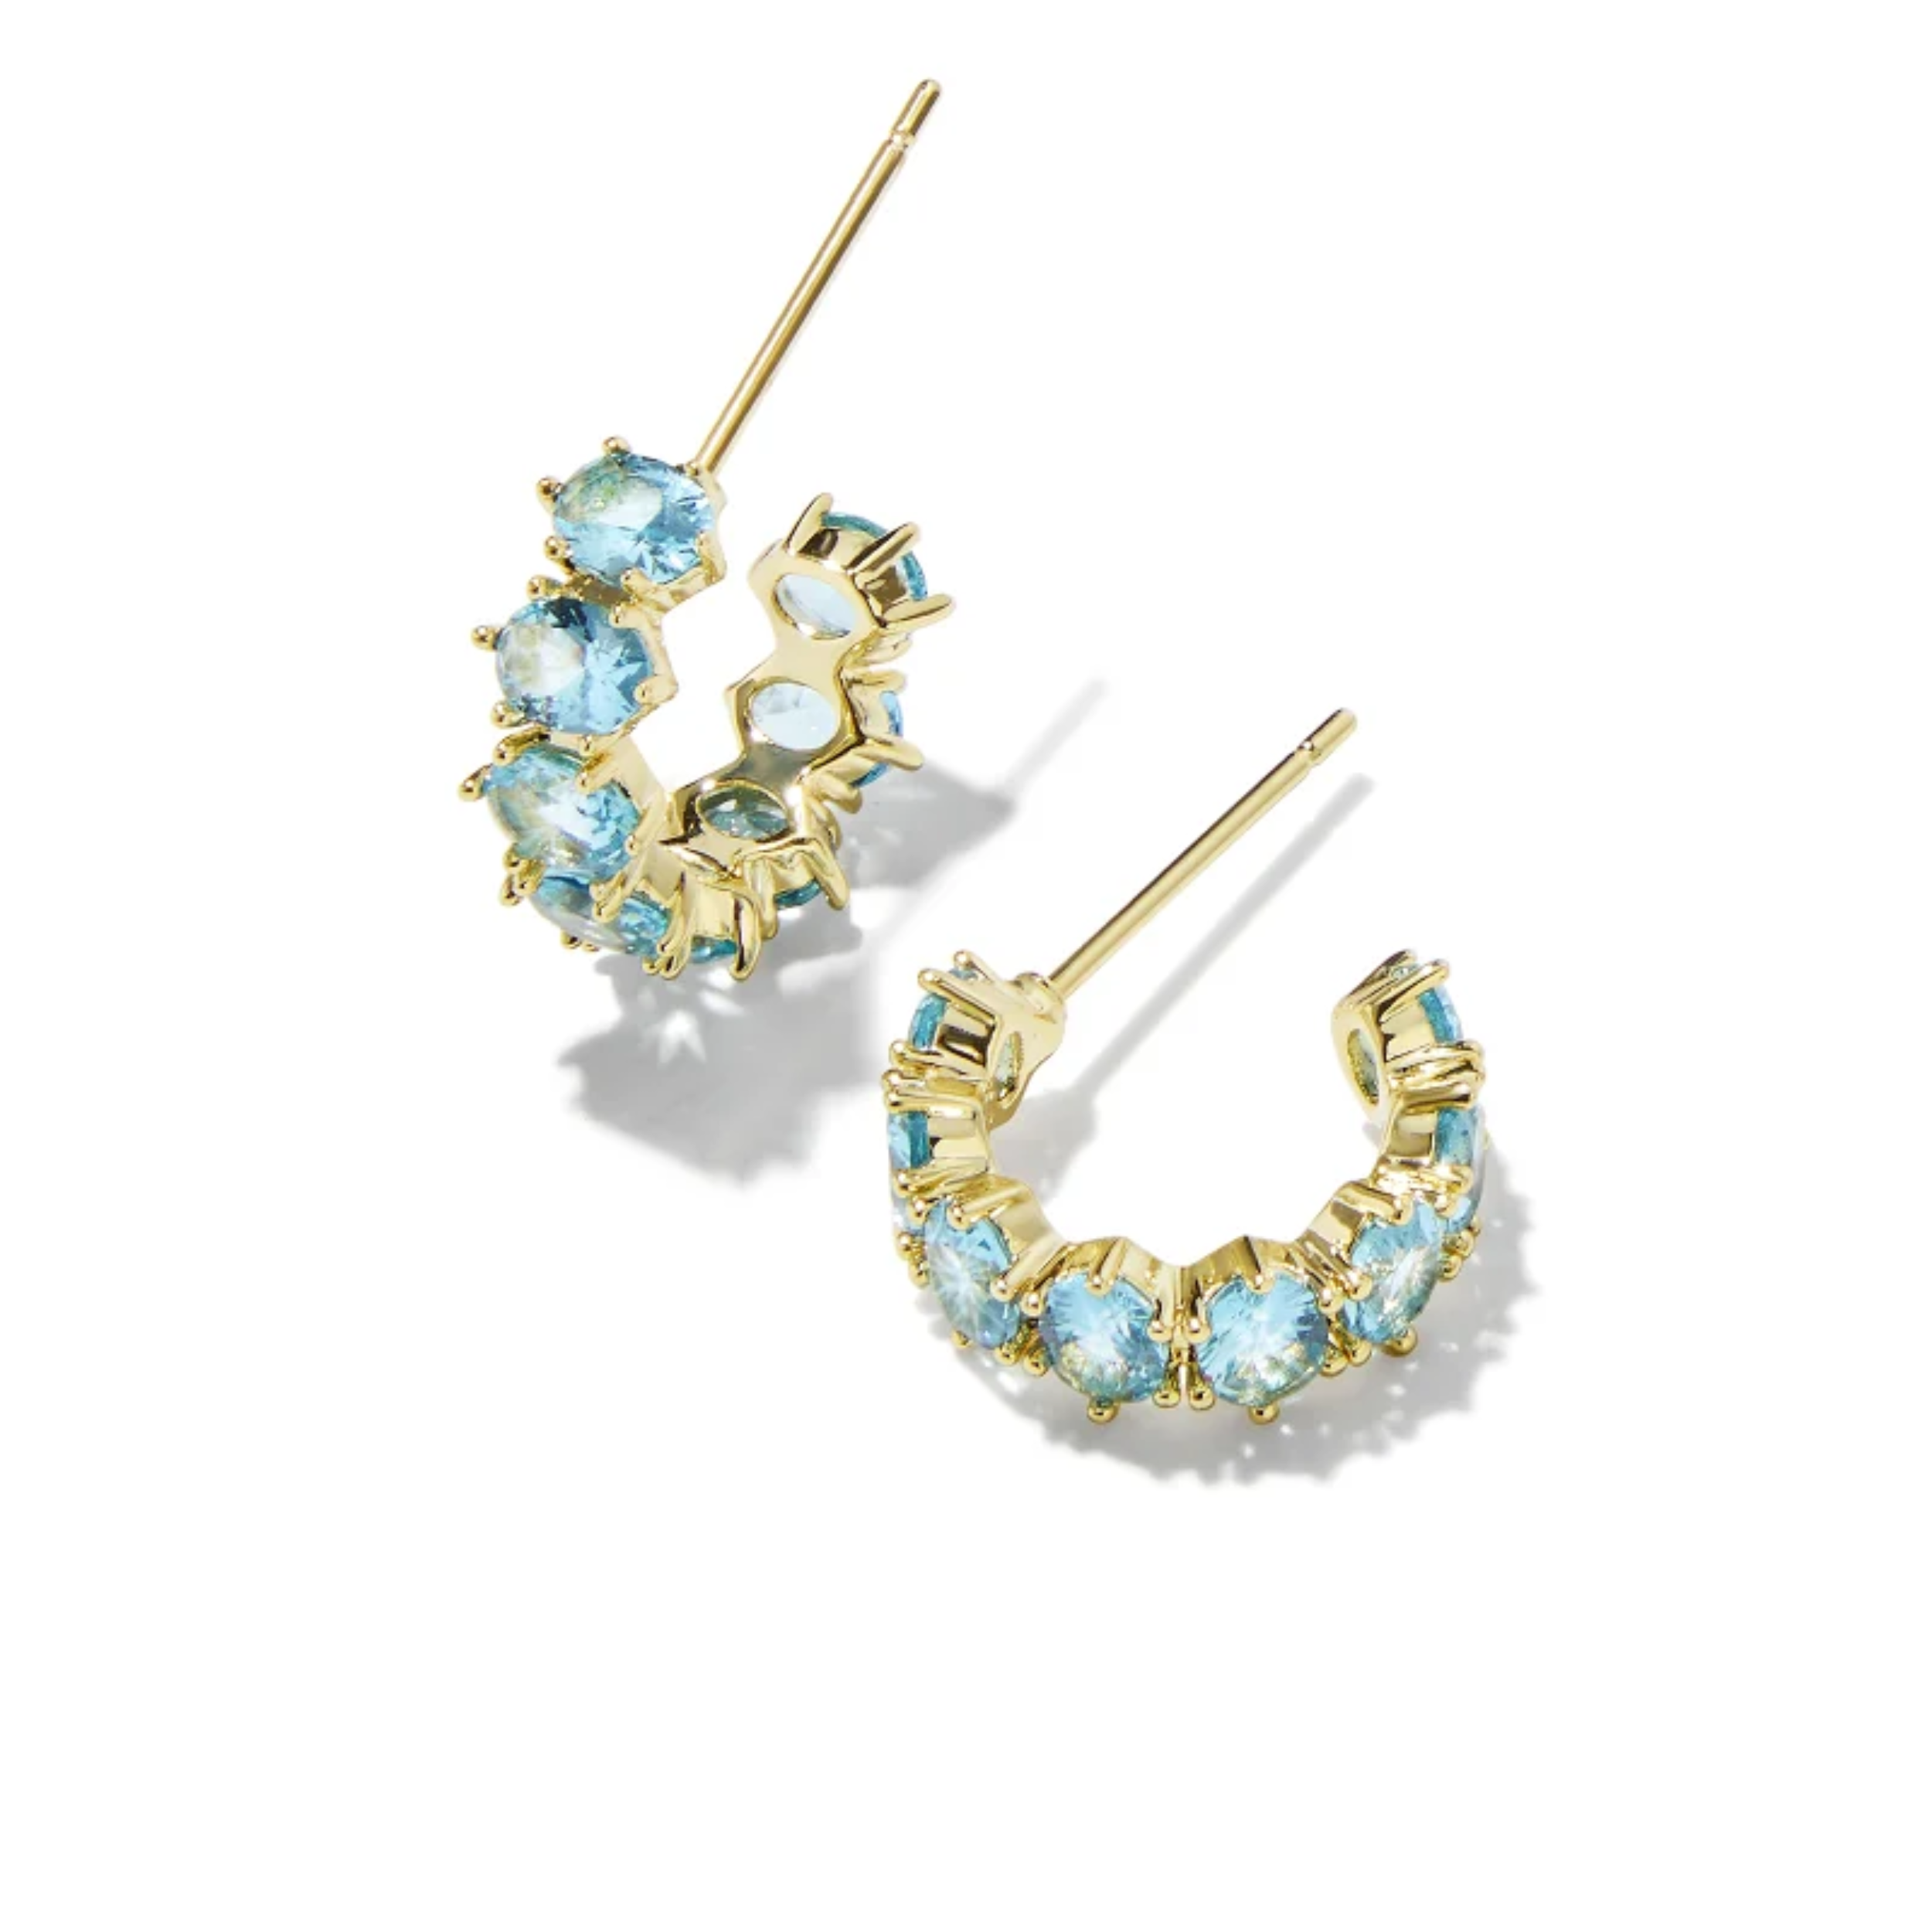 These Cailin Crystal Huggie Earrings in Aqua Crystal by Kendra Scott are pictured on a white background.